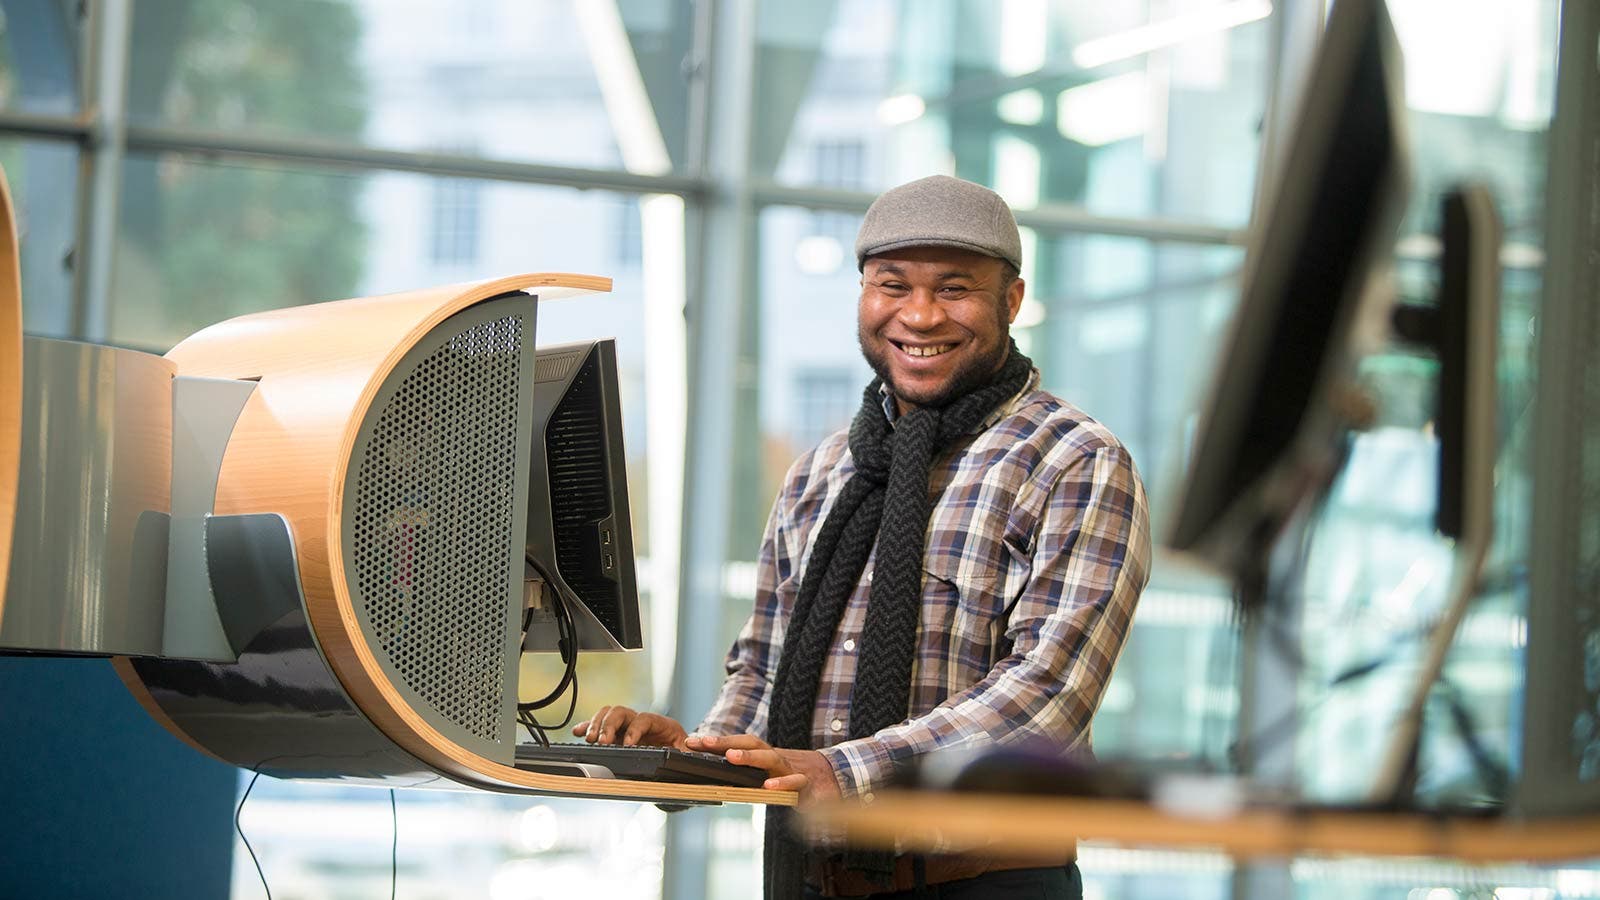 Student smiling and using computer